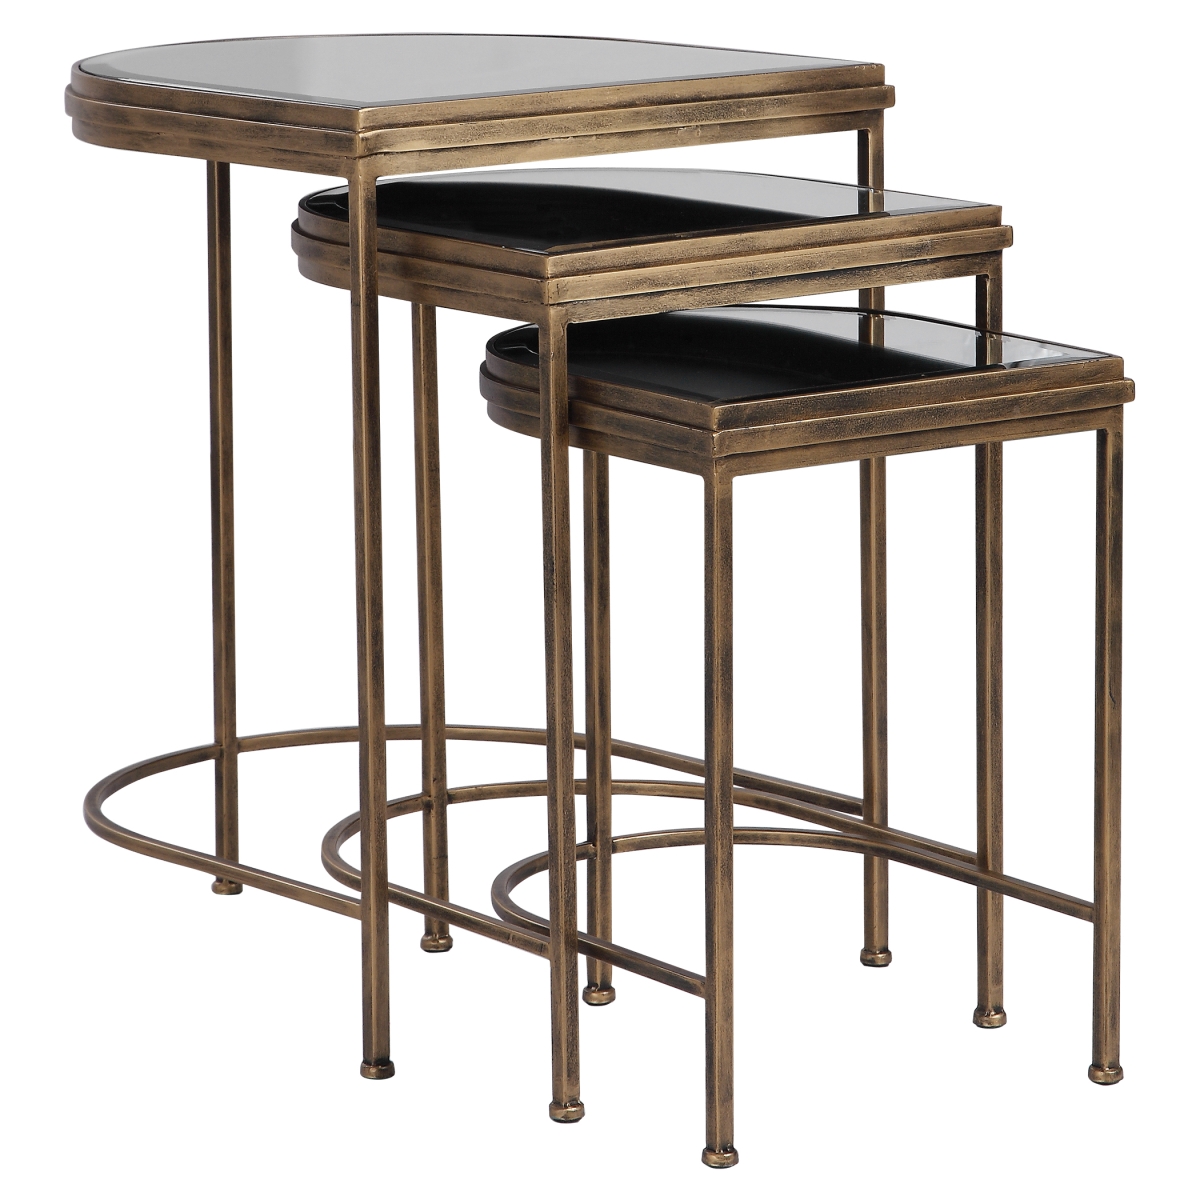 Picture of 212 Main 24908 India Nesting Tables - Set of 3